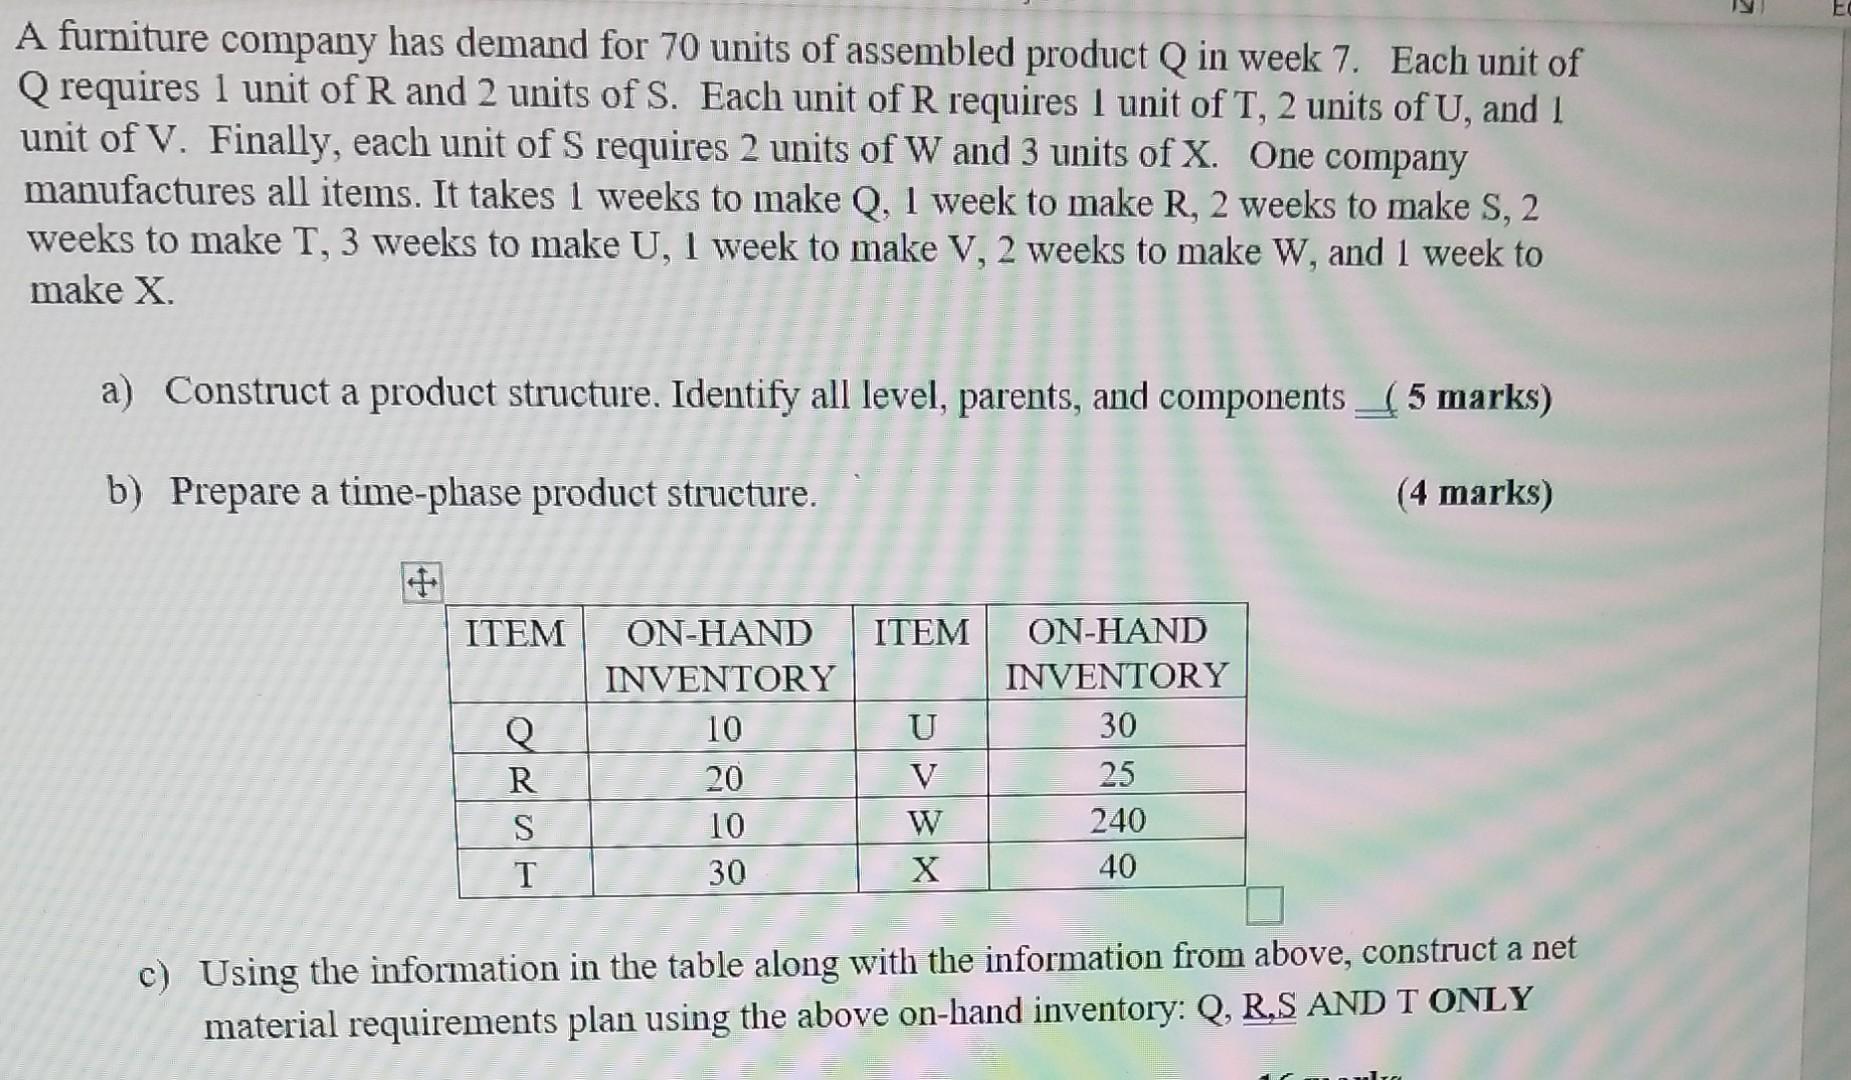 A furniture company has demand for 70 units of assembled product Q in week 7. Each unit ofQ requires 1 unit of Rand 2 units